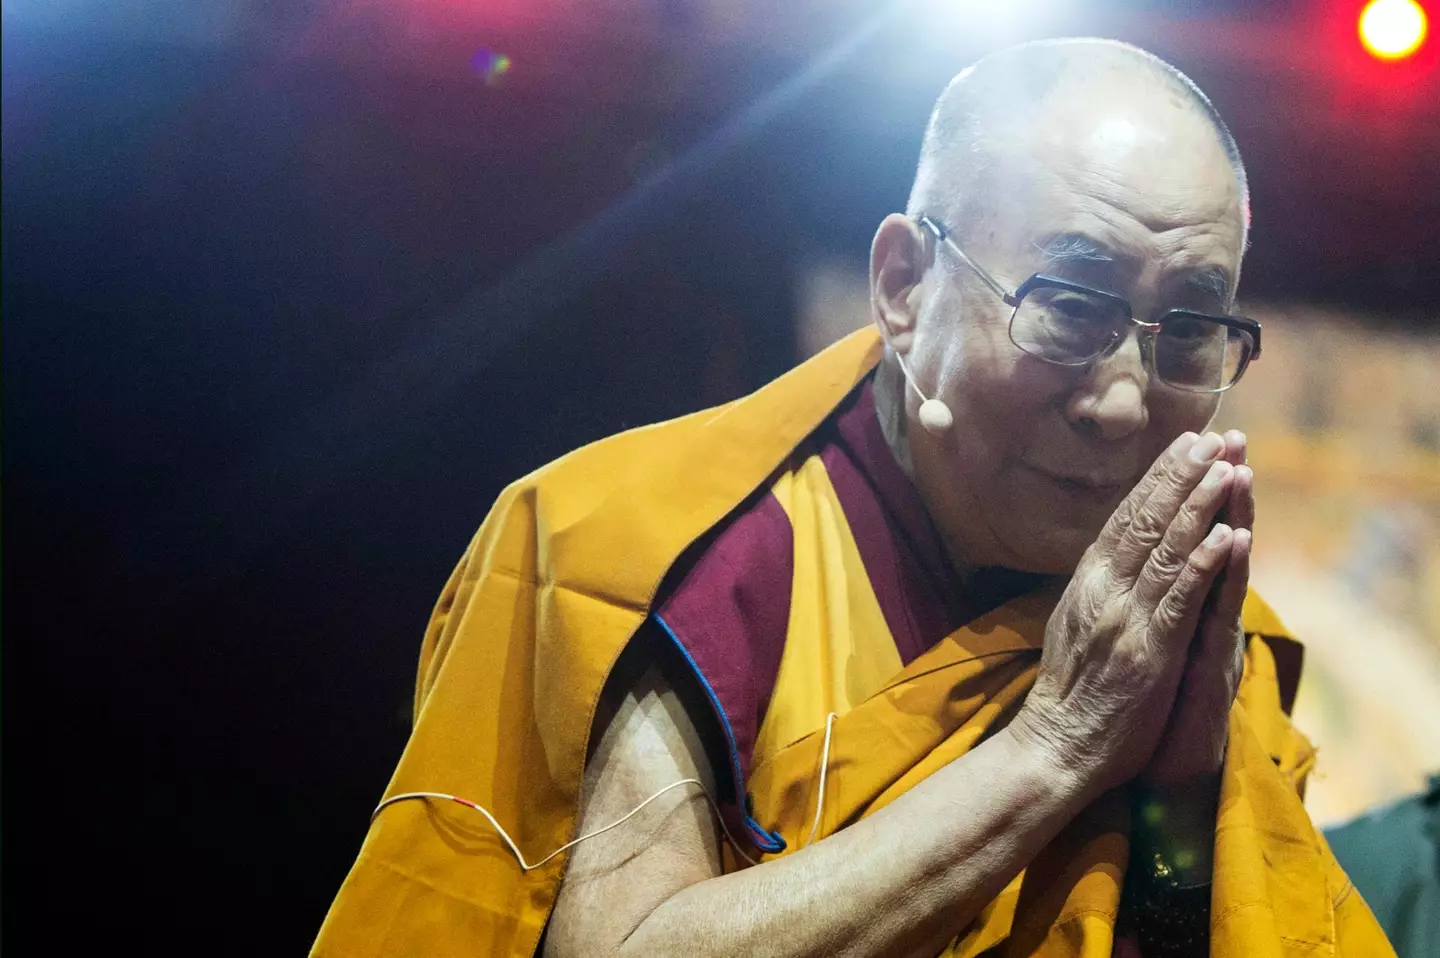 The Dalai Lama has been living in exile in India since 1959.